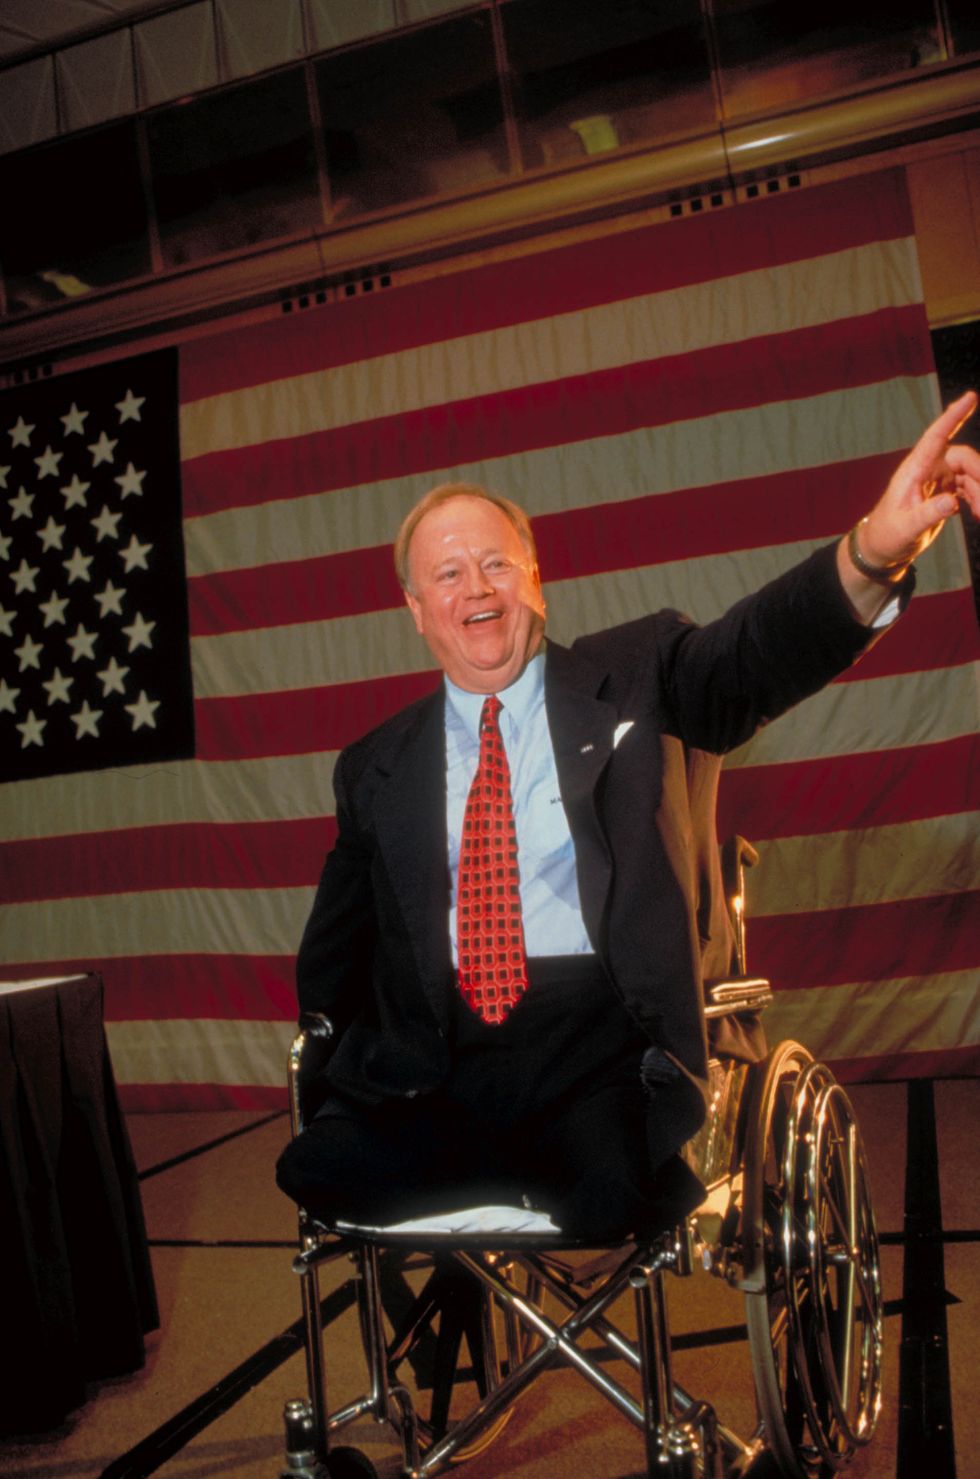 vietnam war veteran triple amputee max cleland pointing as he delivers speech in wheelchair during dem senatorial campaign appearance    photo by thomas s englandgetty images